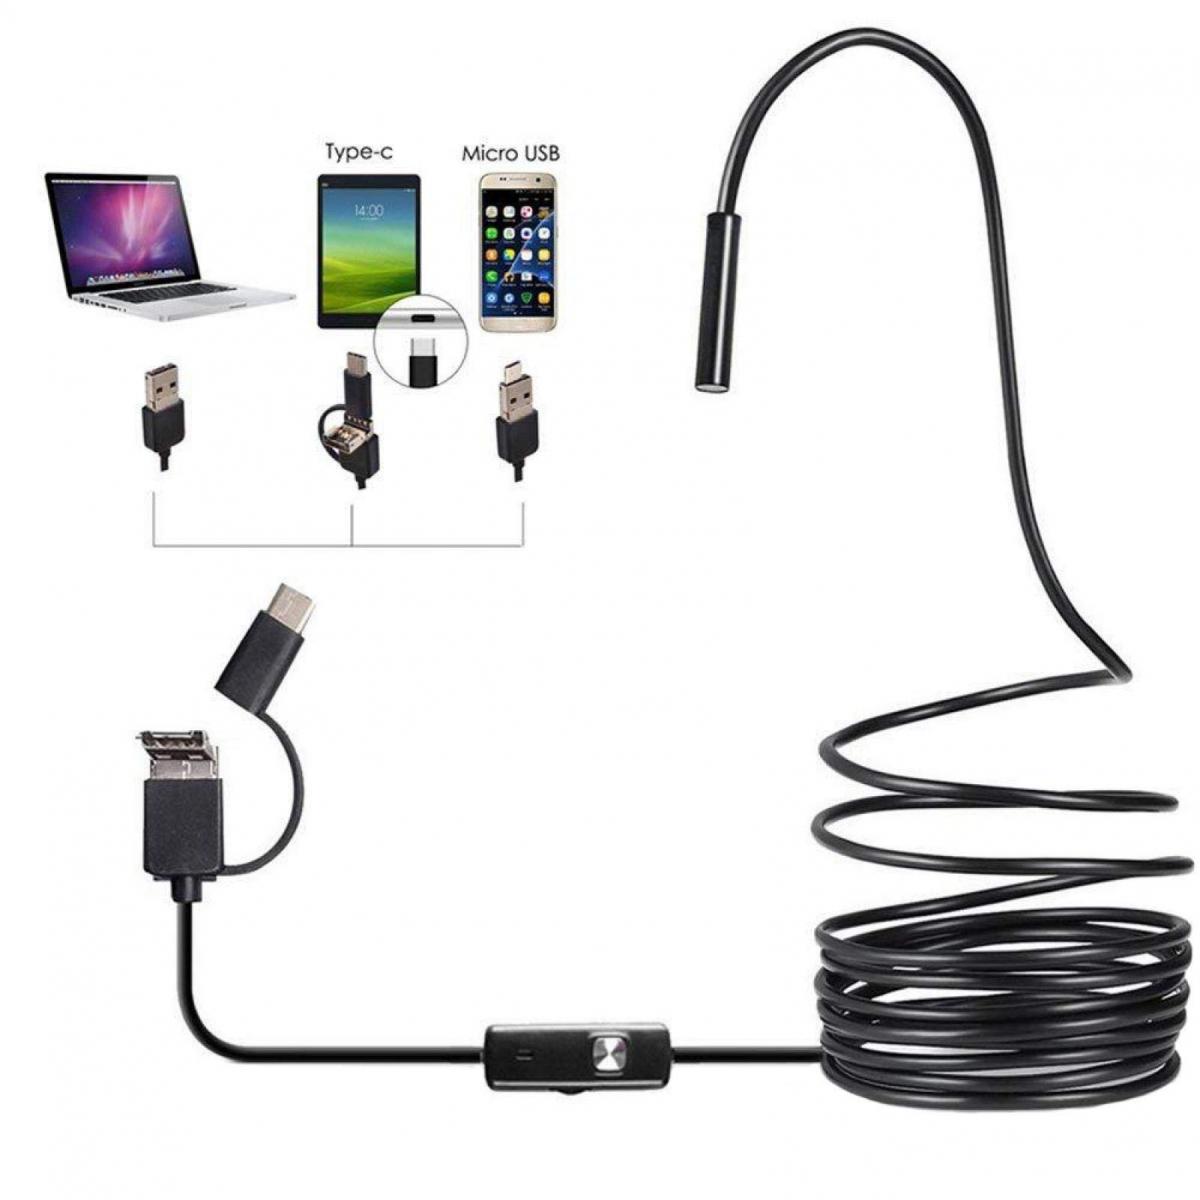 Waterproof Endoscope 1pc Black 15-Meter USB Endoscope with 2-Megapixel Waterproof Camera USB Endoscope for Pipe Car Inspection Flexible Endoscope 